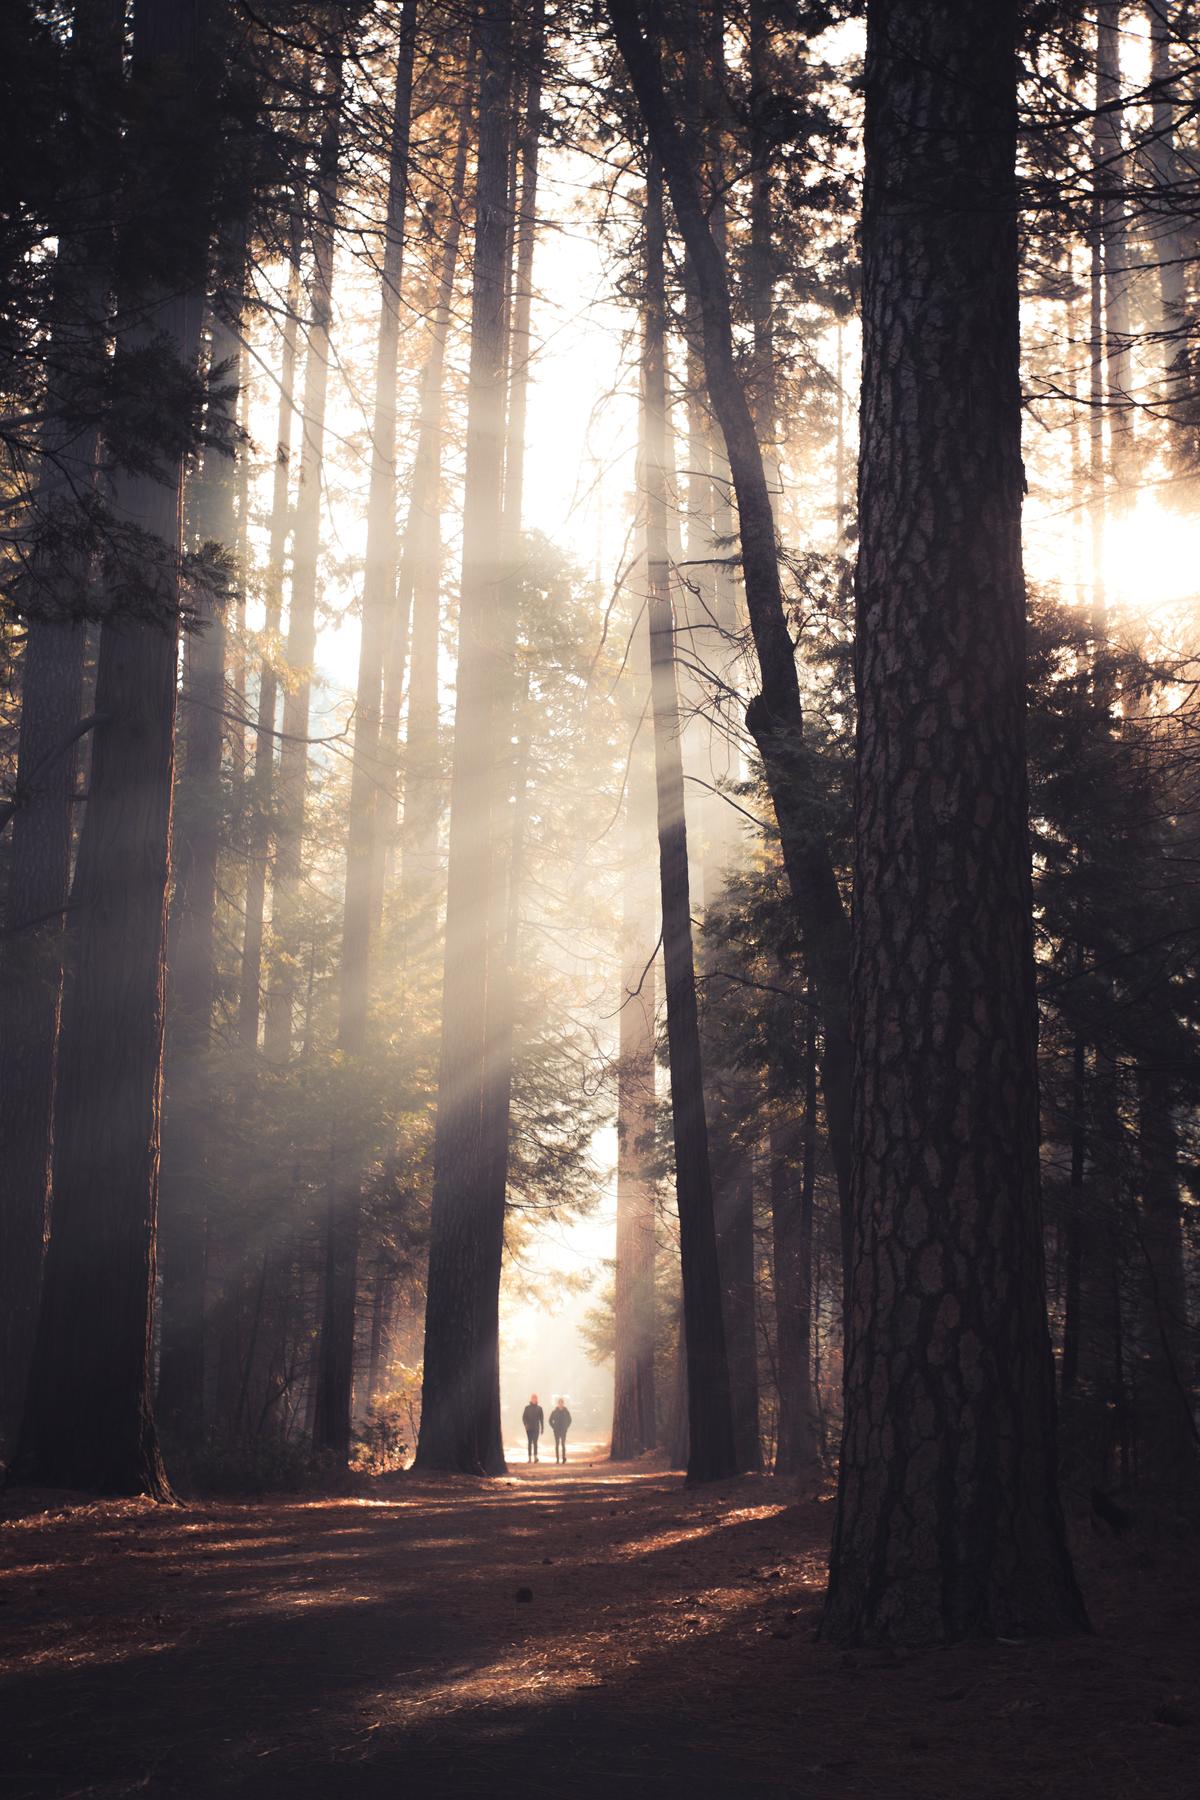 People walking on a path through the redwoods with the sun shining through